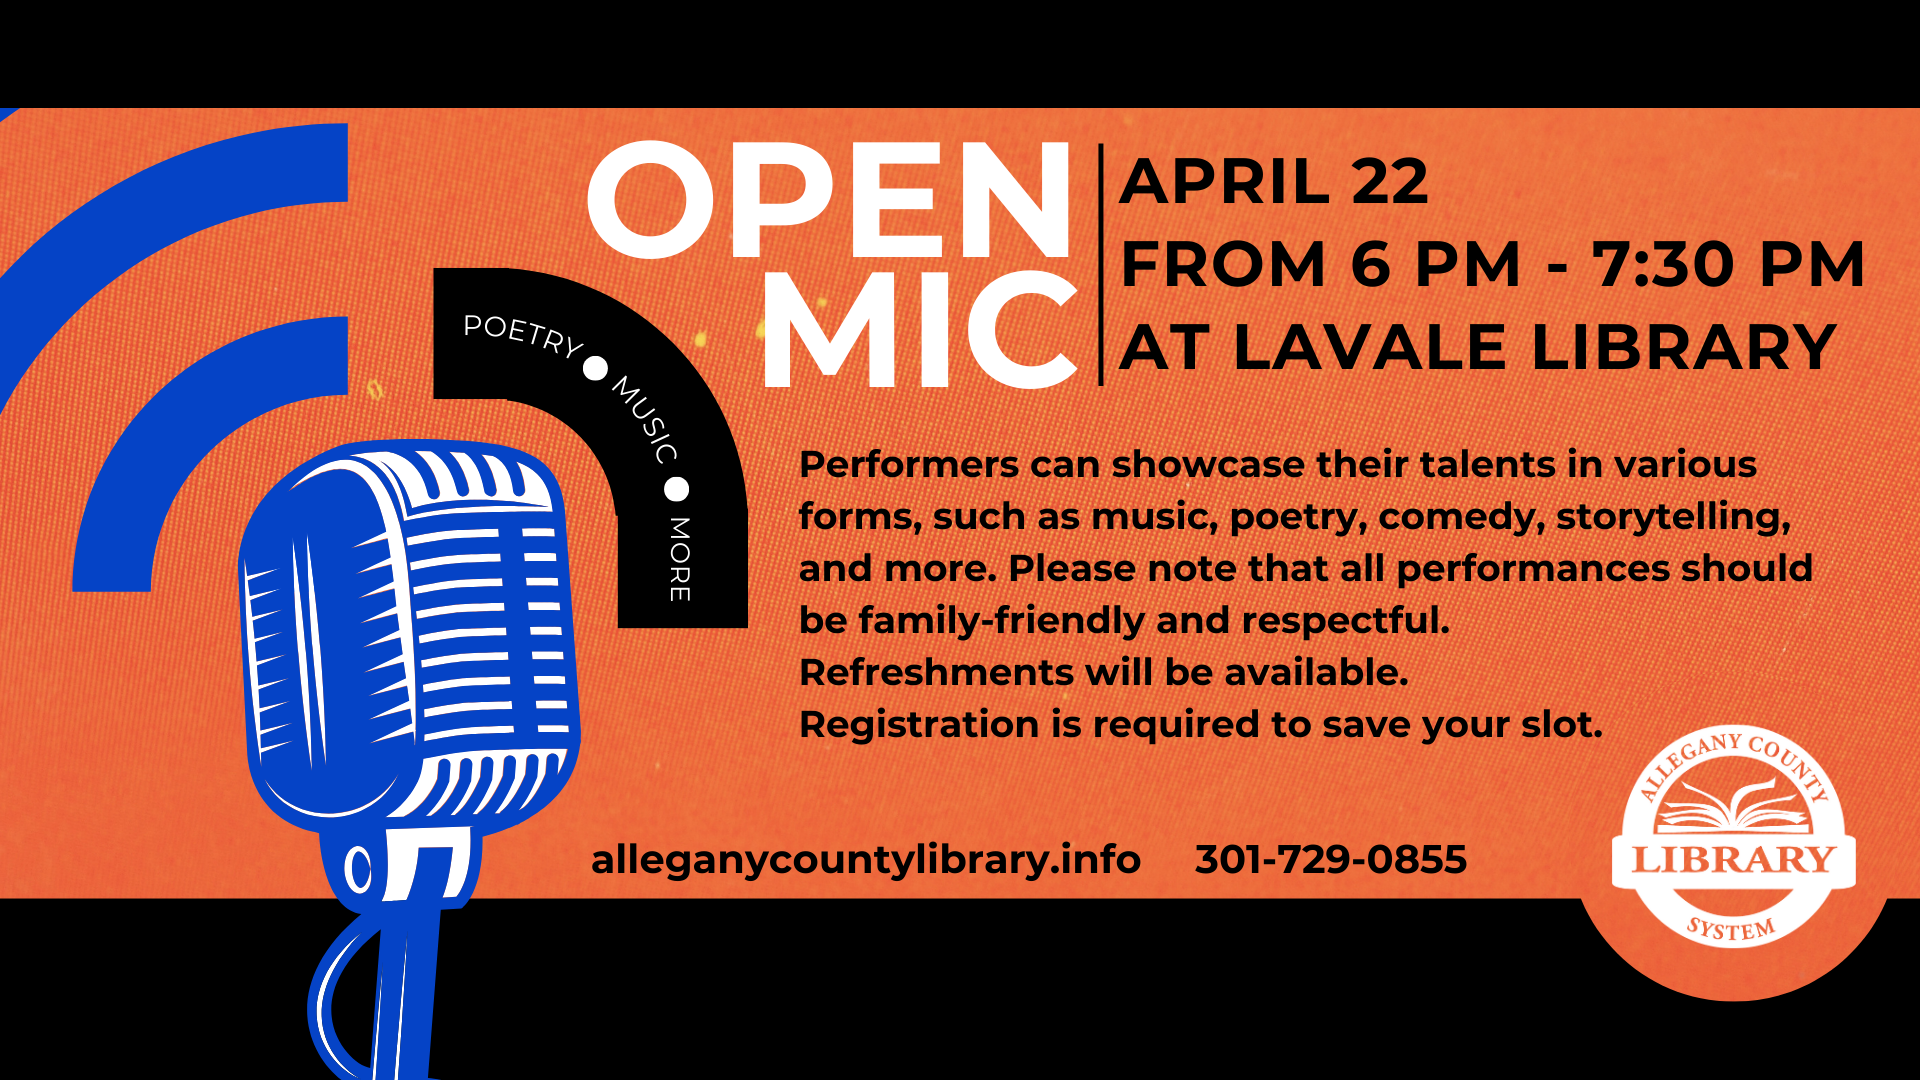 Open Mic Night At LaVale April 22 at 6 PM